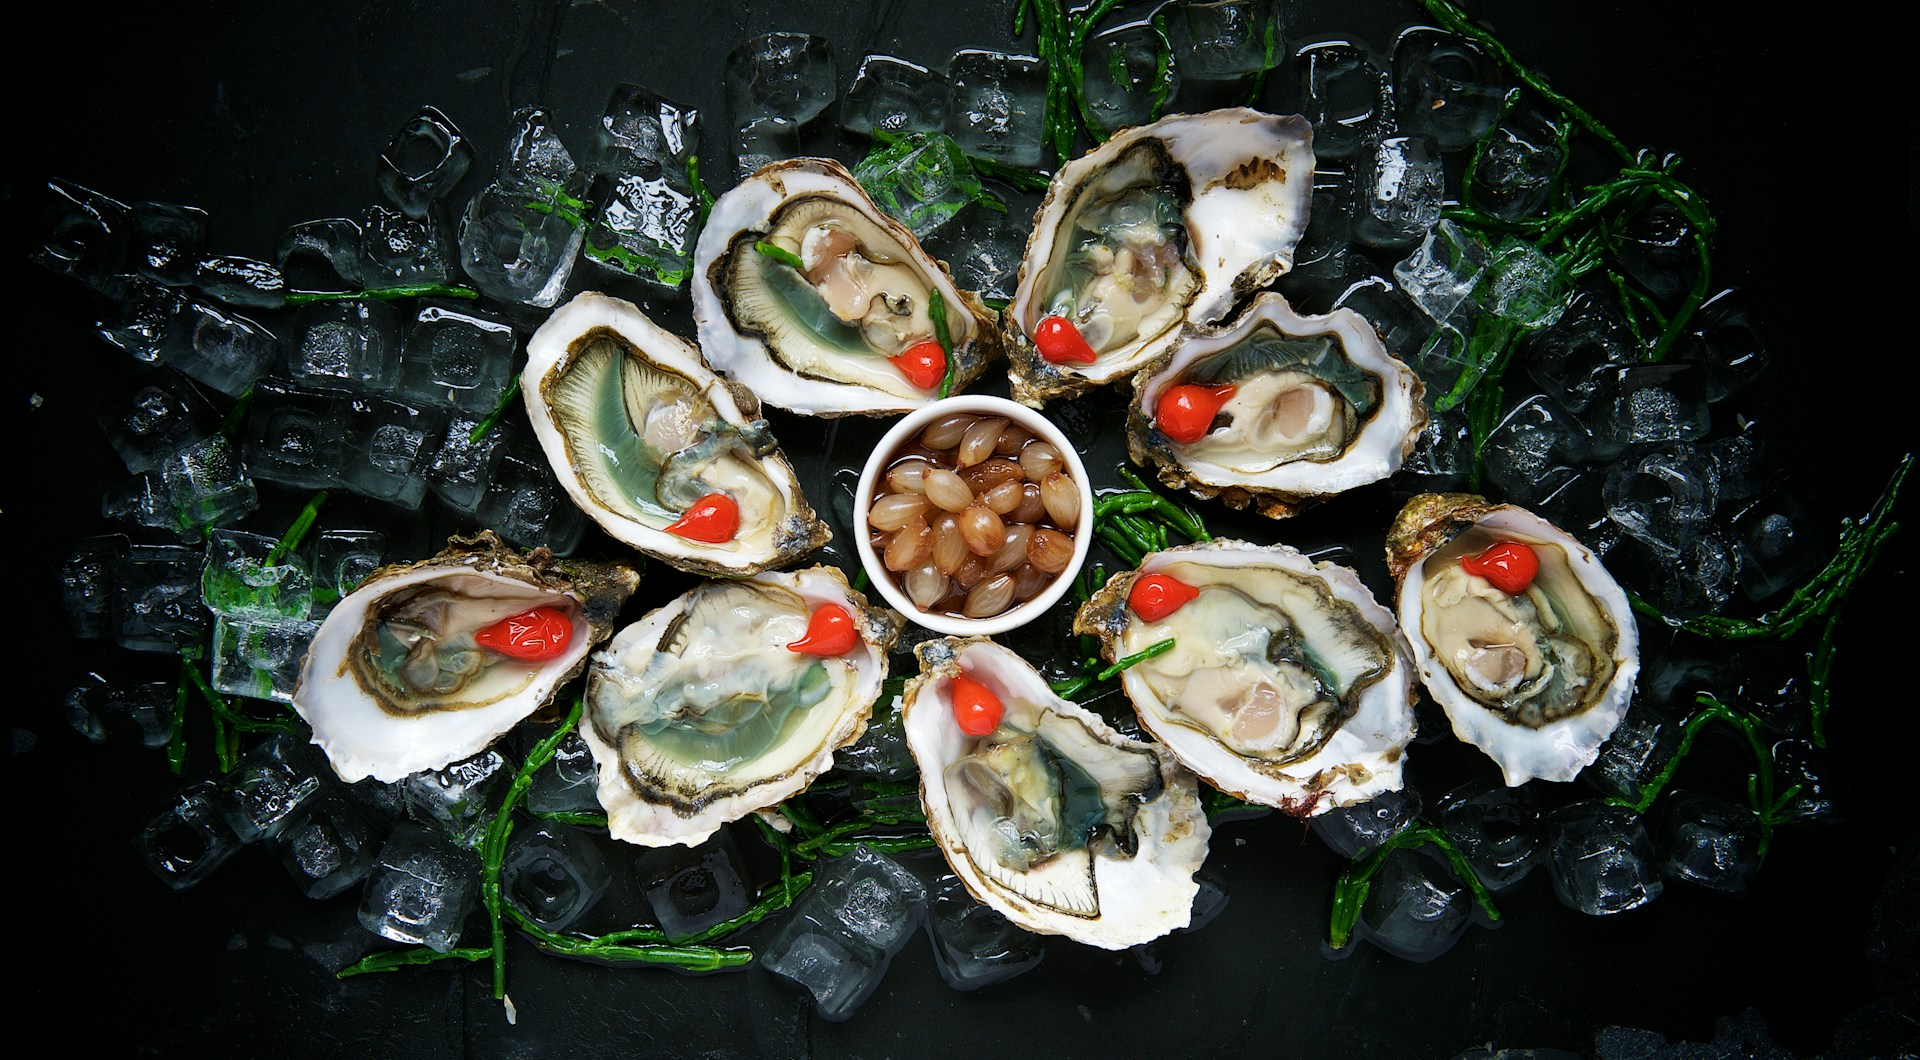 Pictures of Oysters Pc Wallpaper 1920x1060